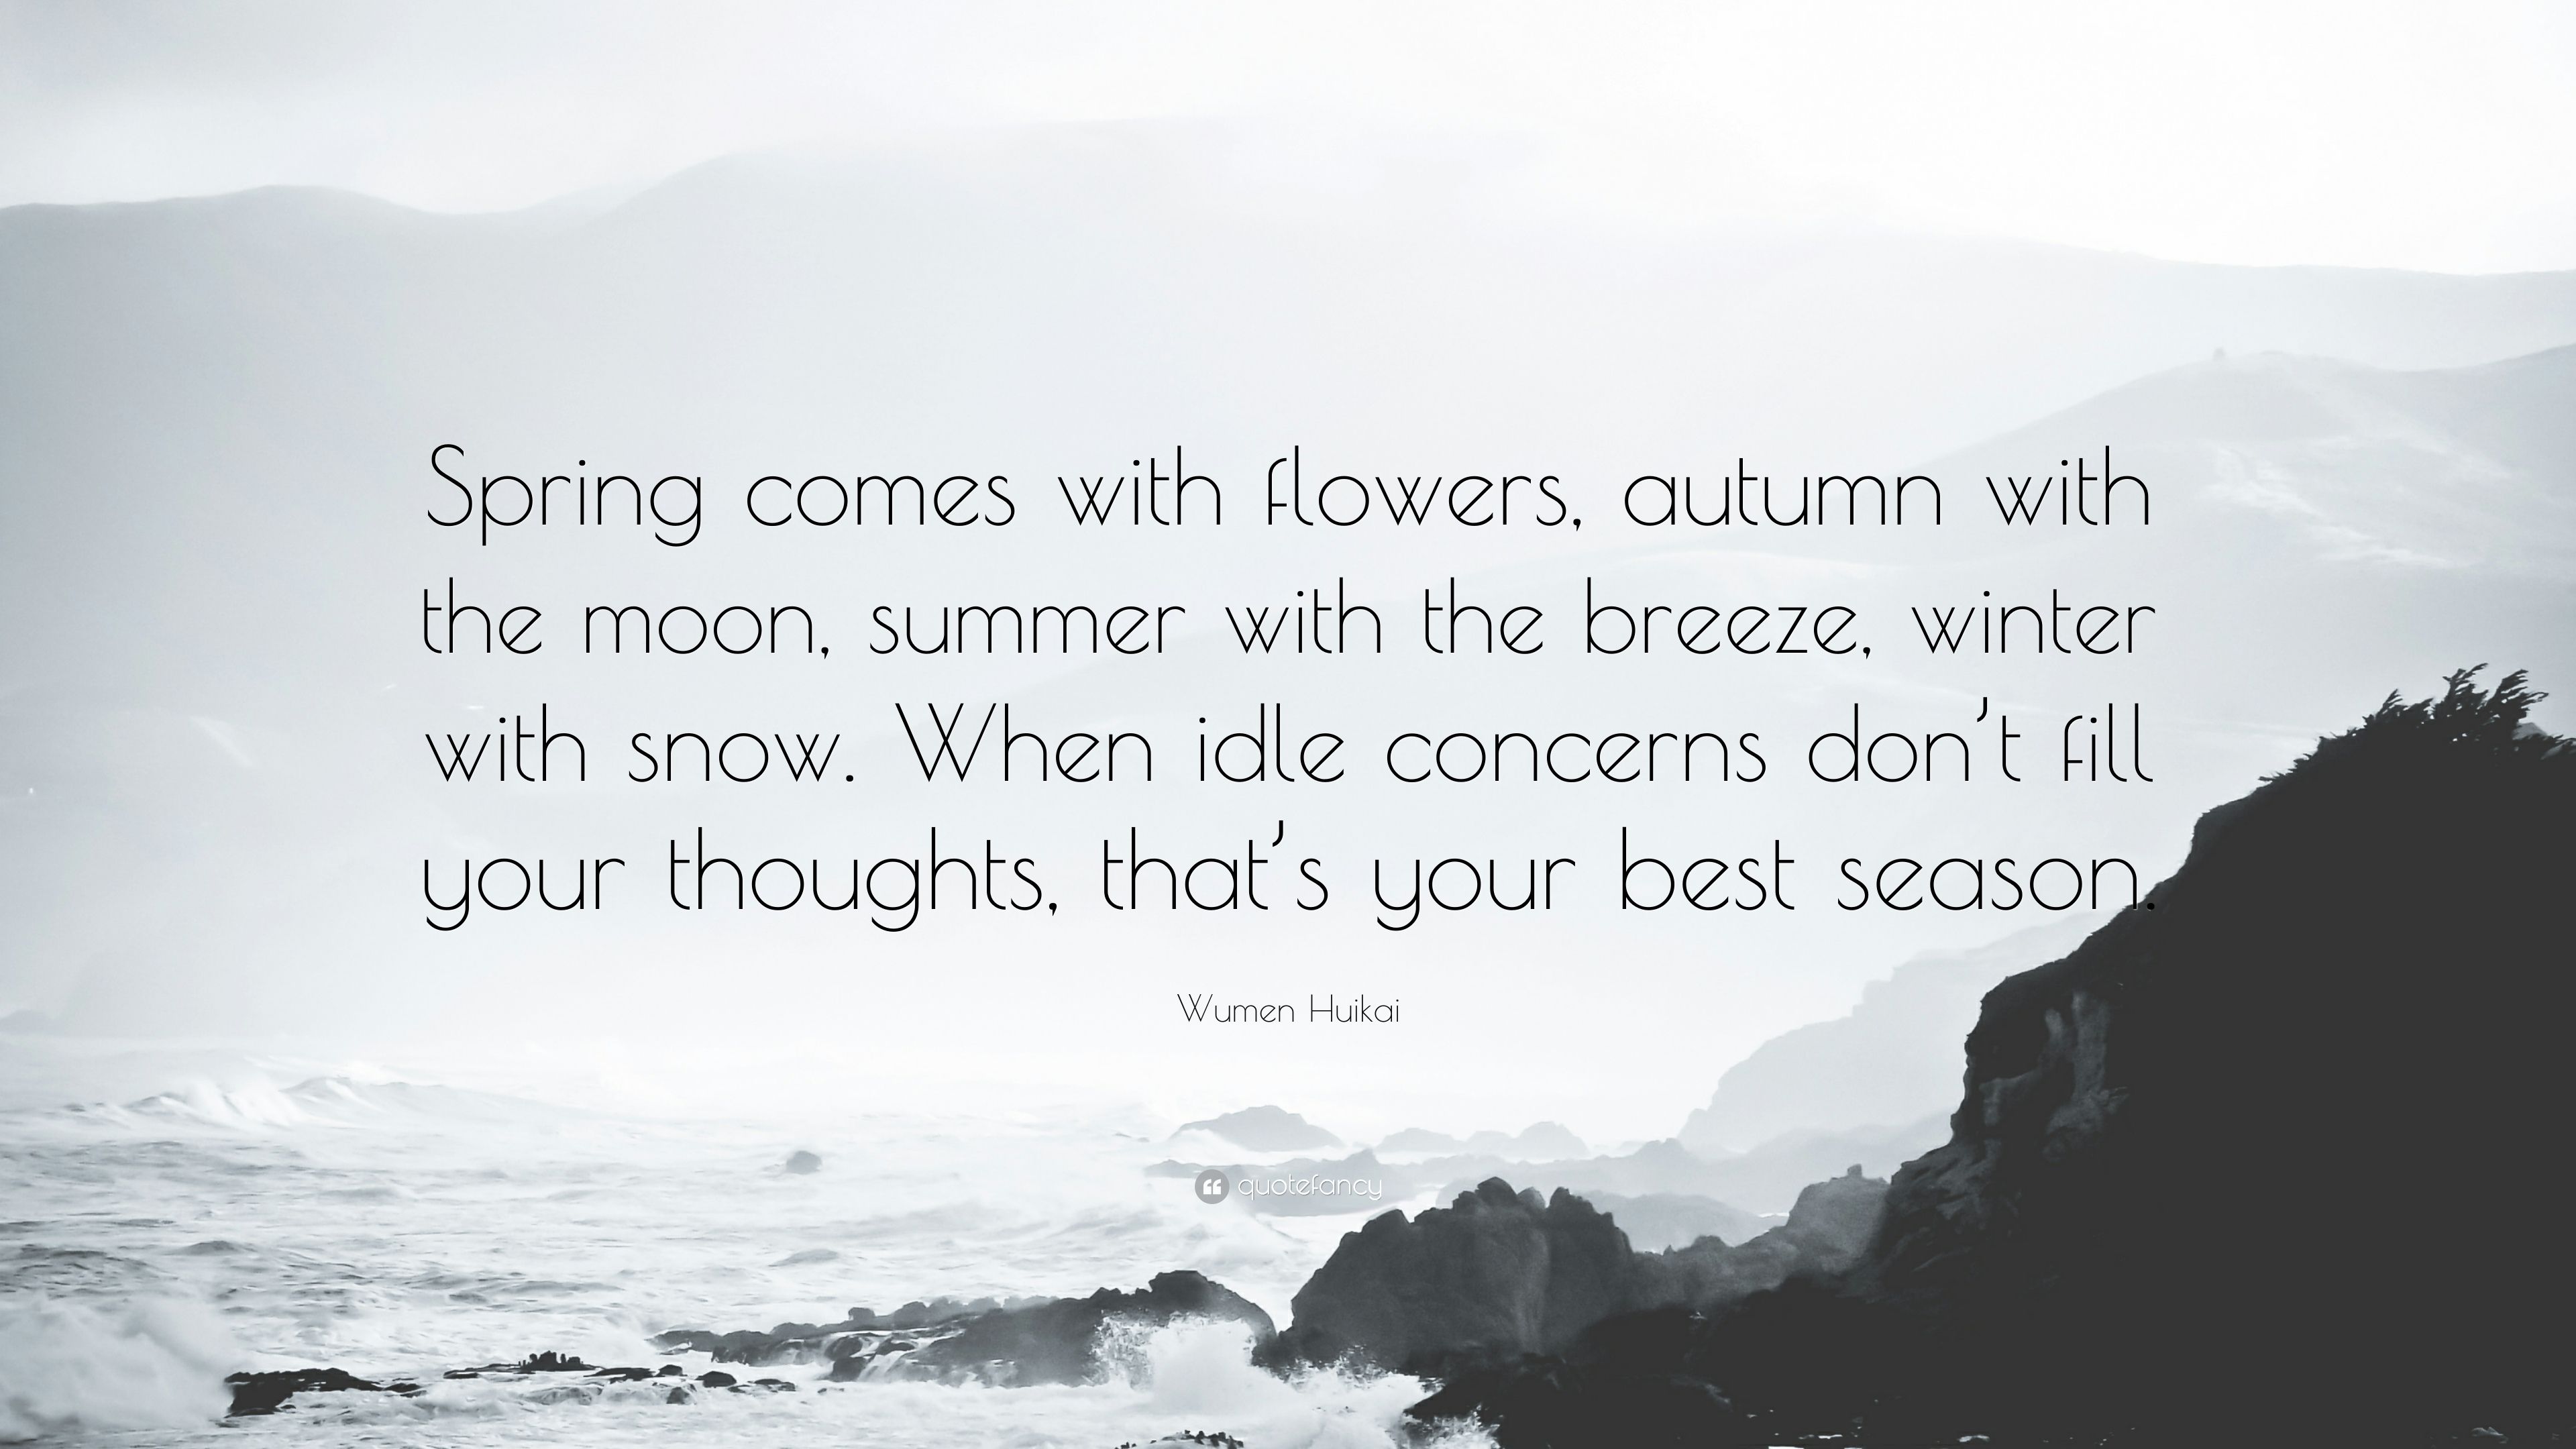 Wumen Huikai Quote: “Spring comes with flowers, autumn with